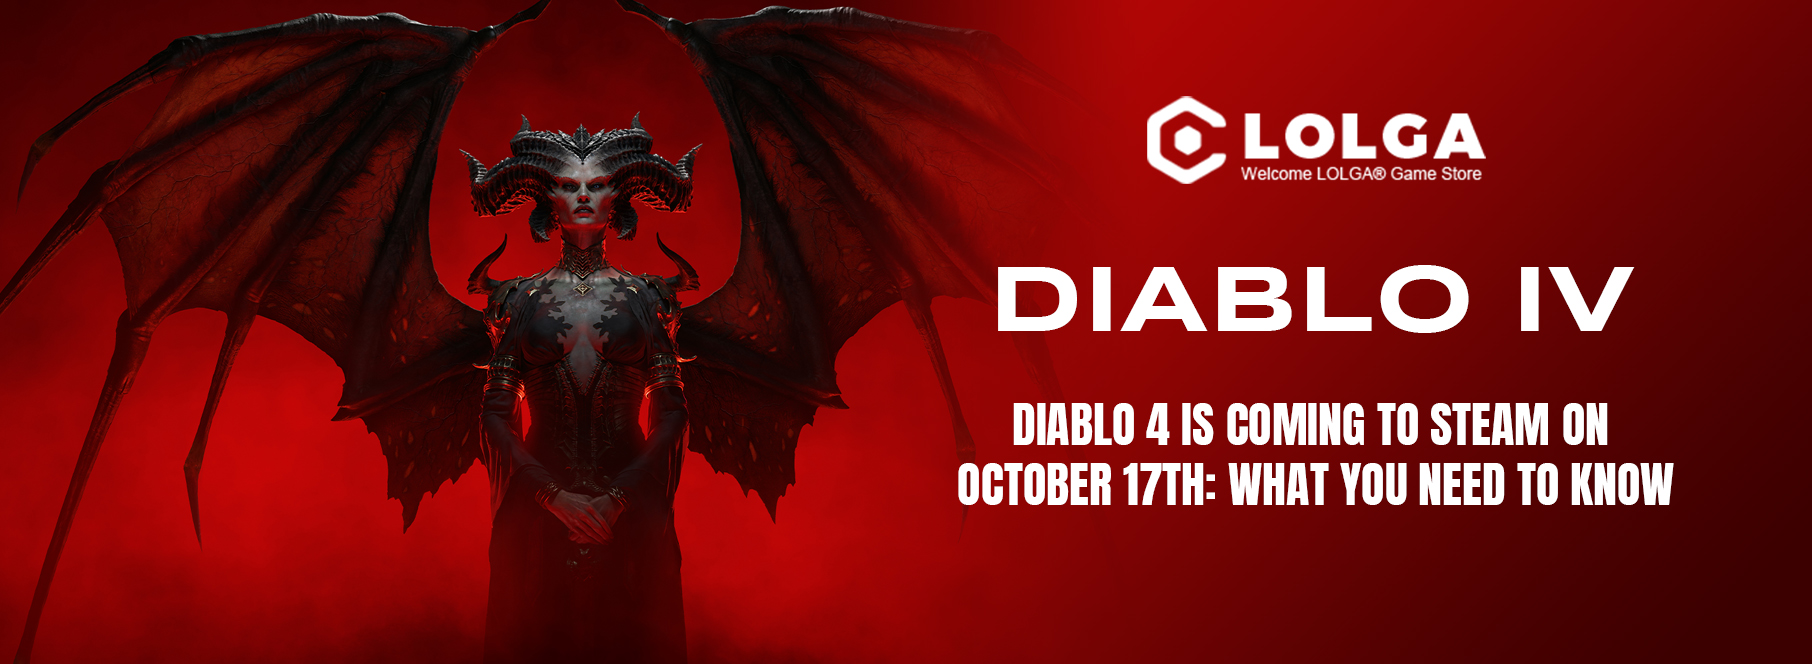 Diablo 4 is Coming to Steam on October 17th: What You Need to Know